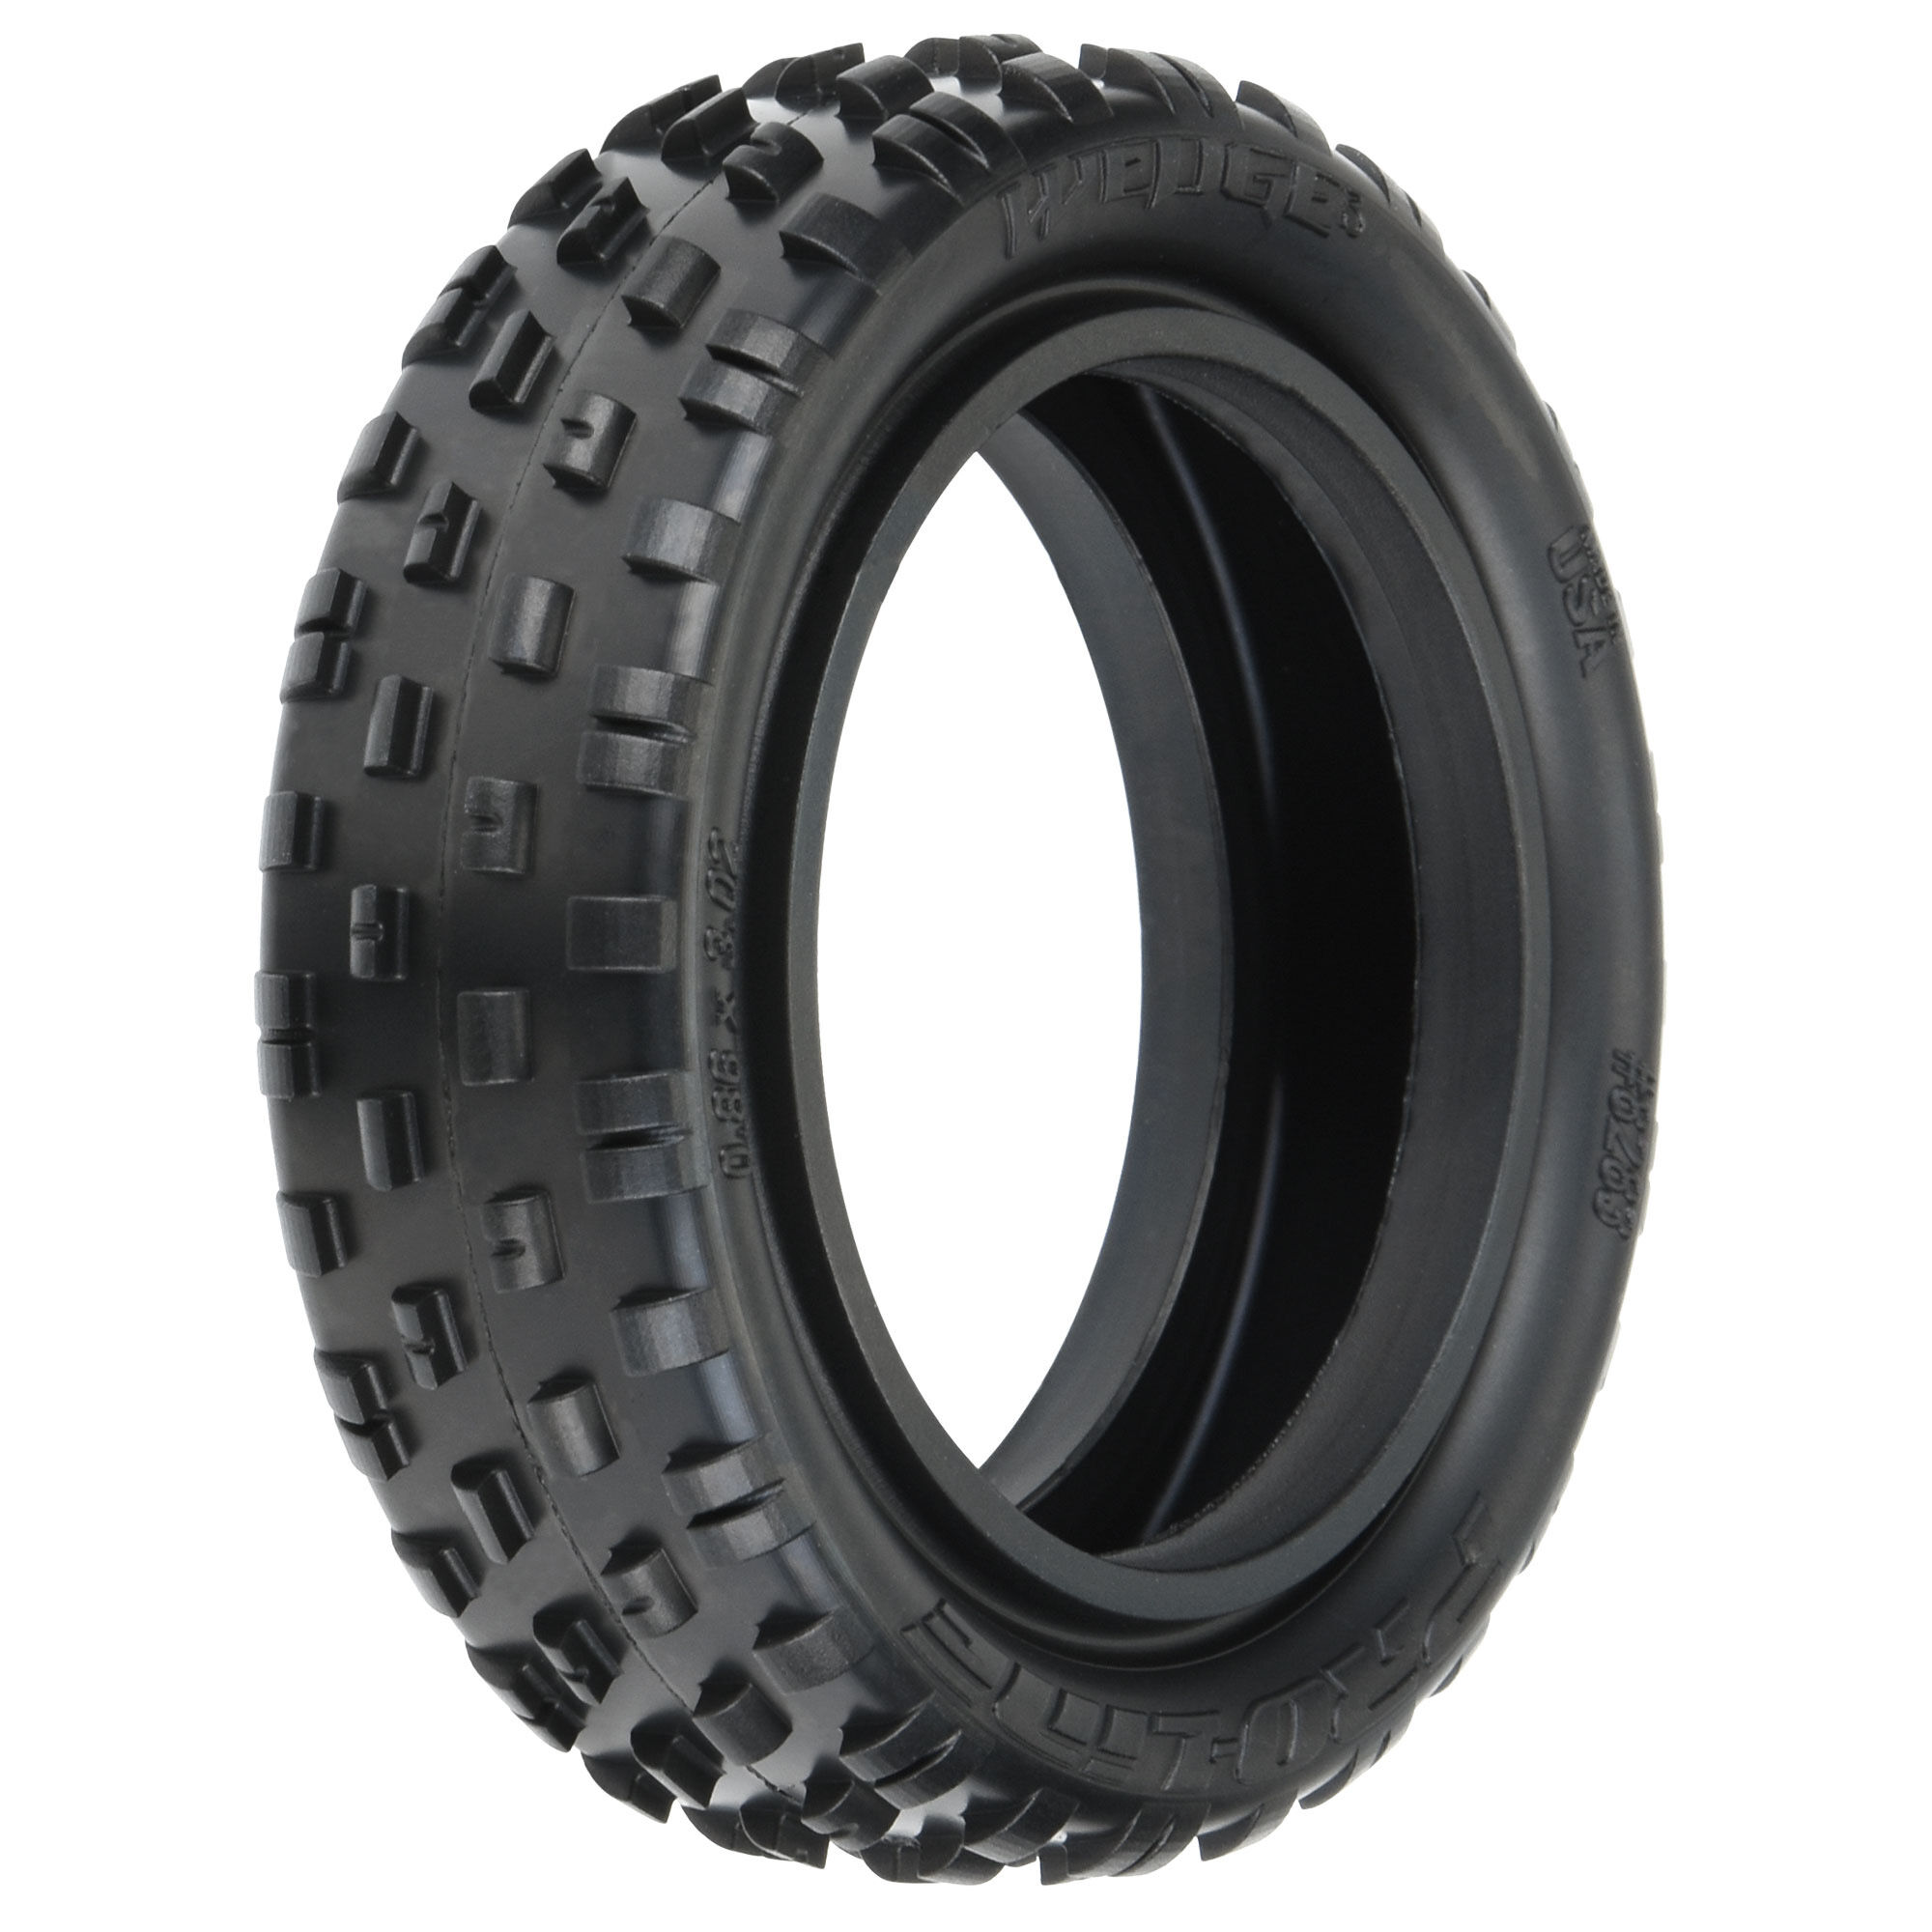 8261-103 Wedge Carpet 2.2" 4WD Front Z3 2 New Pro-Line Buggy Tires 